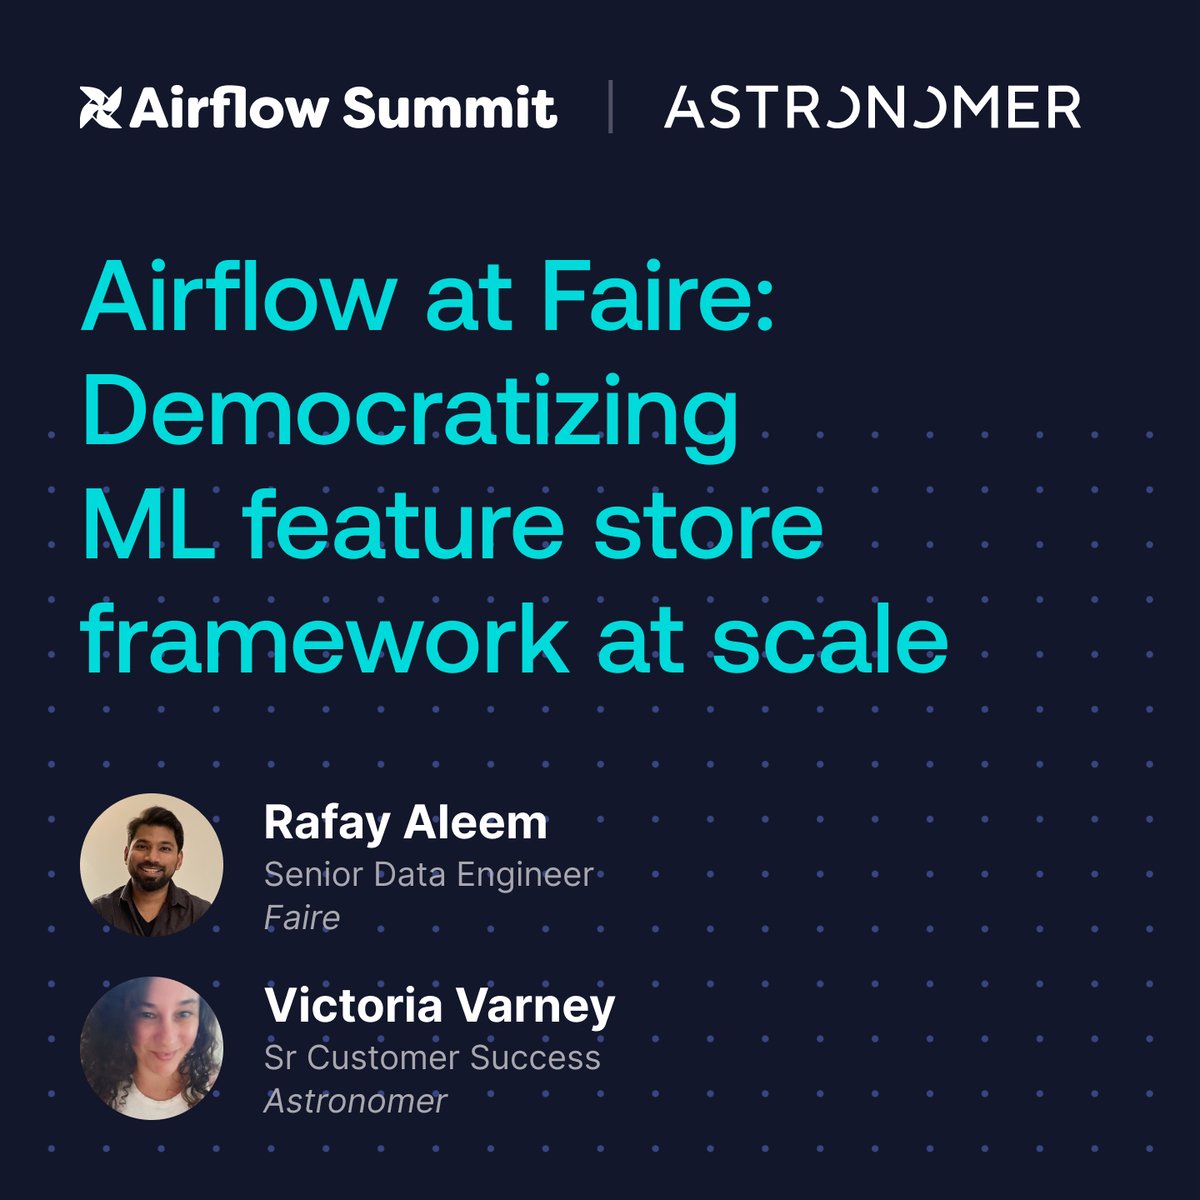 Get an insider's look 🔎 at how @Faire supercharged #ML training, built a framework that powers feature store, and enabled data scientists 👨‍🏫 🧑‍💼 to define & backfill new features with dynamic #DAGs. 

Grab your #AirflowSummit2023 🎟 before they're gone! bit.ly/3qUl1me